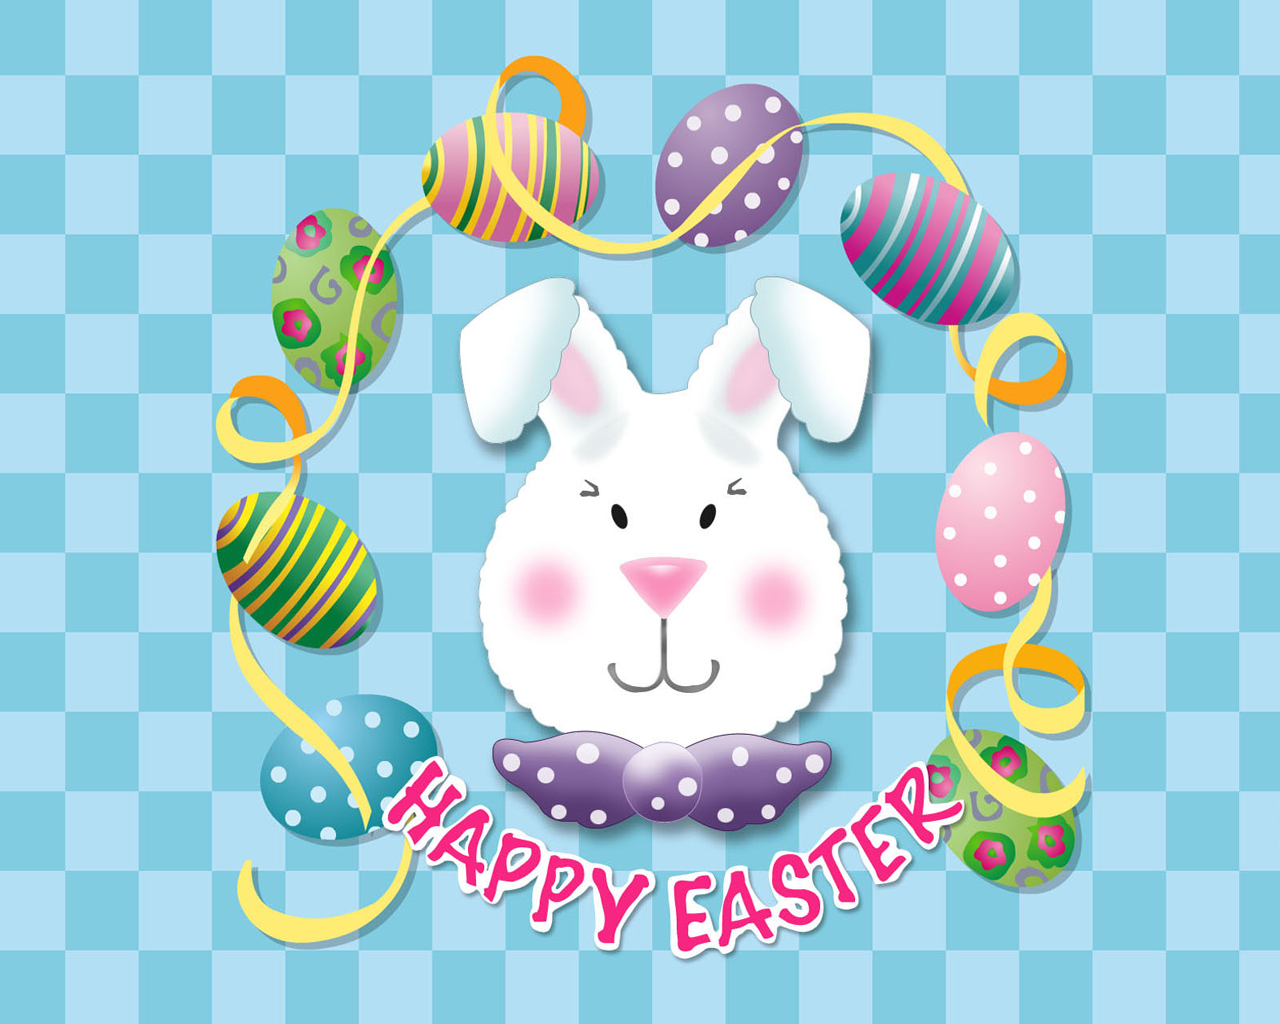 Adorable Cartoon Easter Bunny Wallpaper Is A Great For